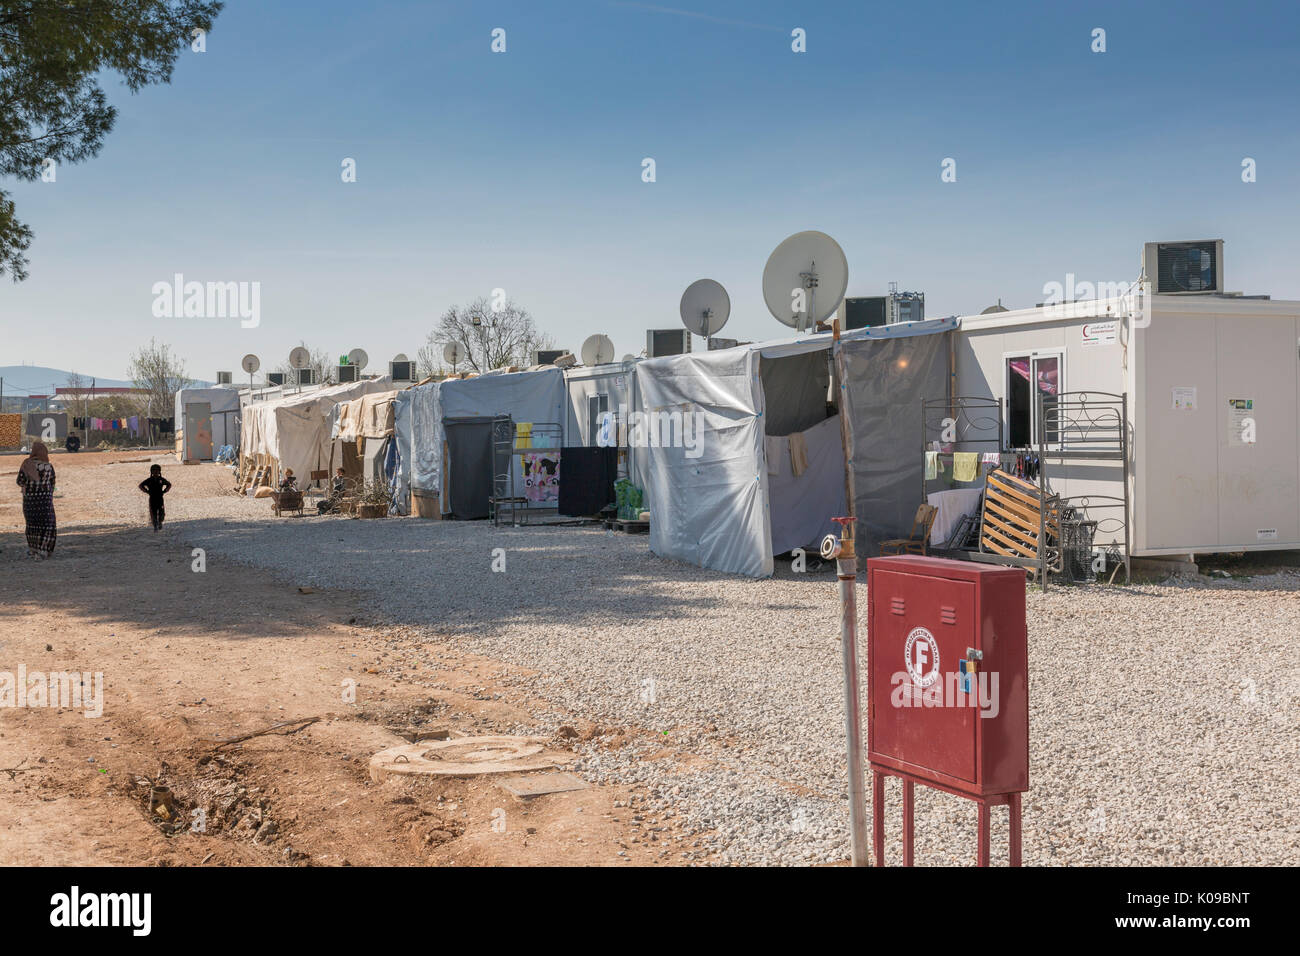 Ritsona Refugee camp for Syrians in Greece. Stock Photo